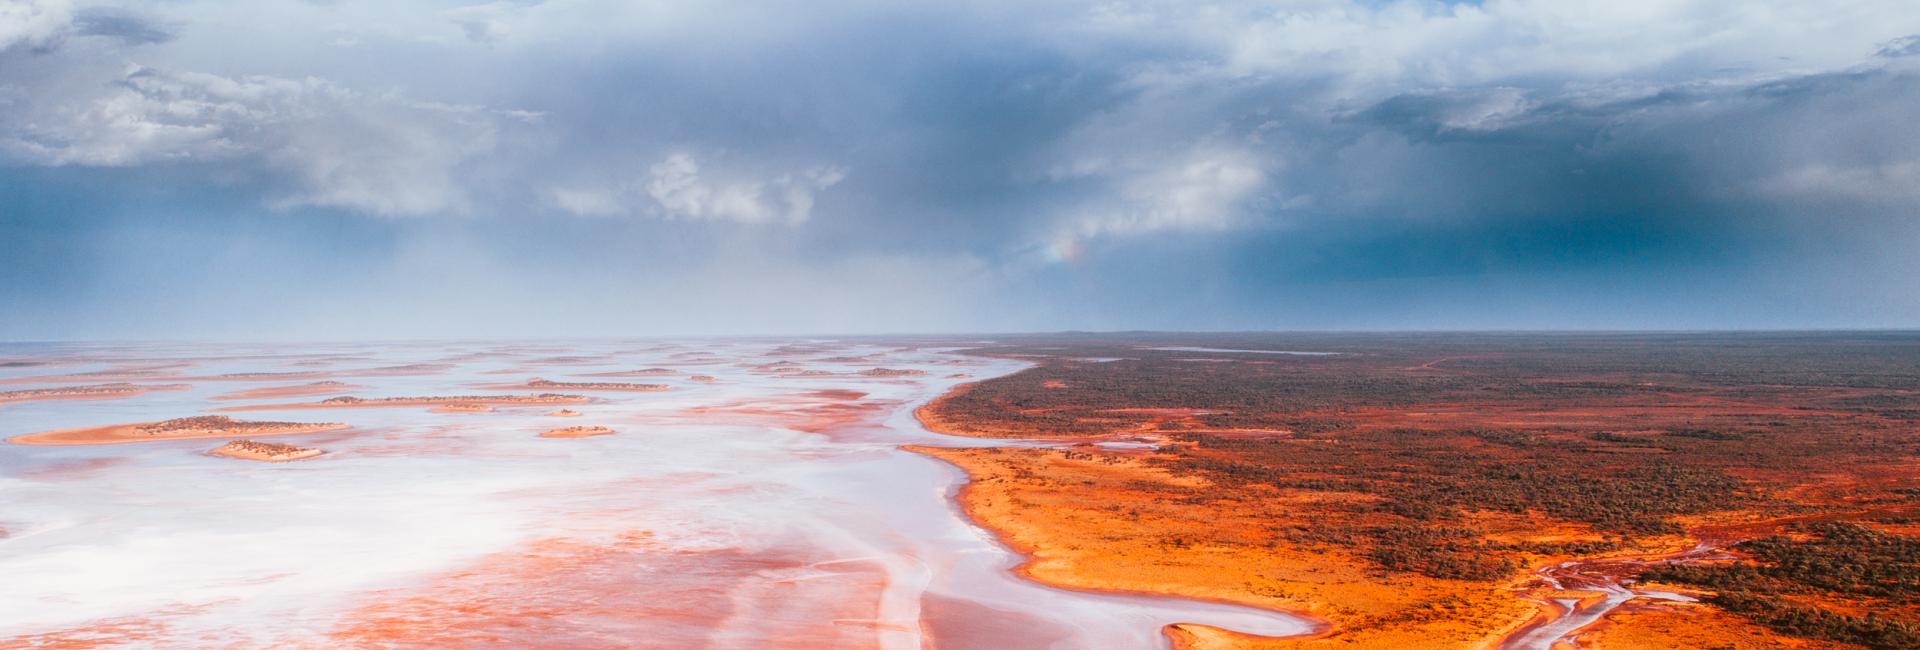 A pink and shimmering salt lake with blue sky and clouds